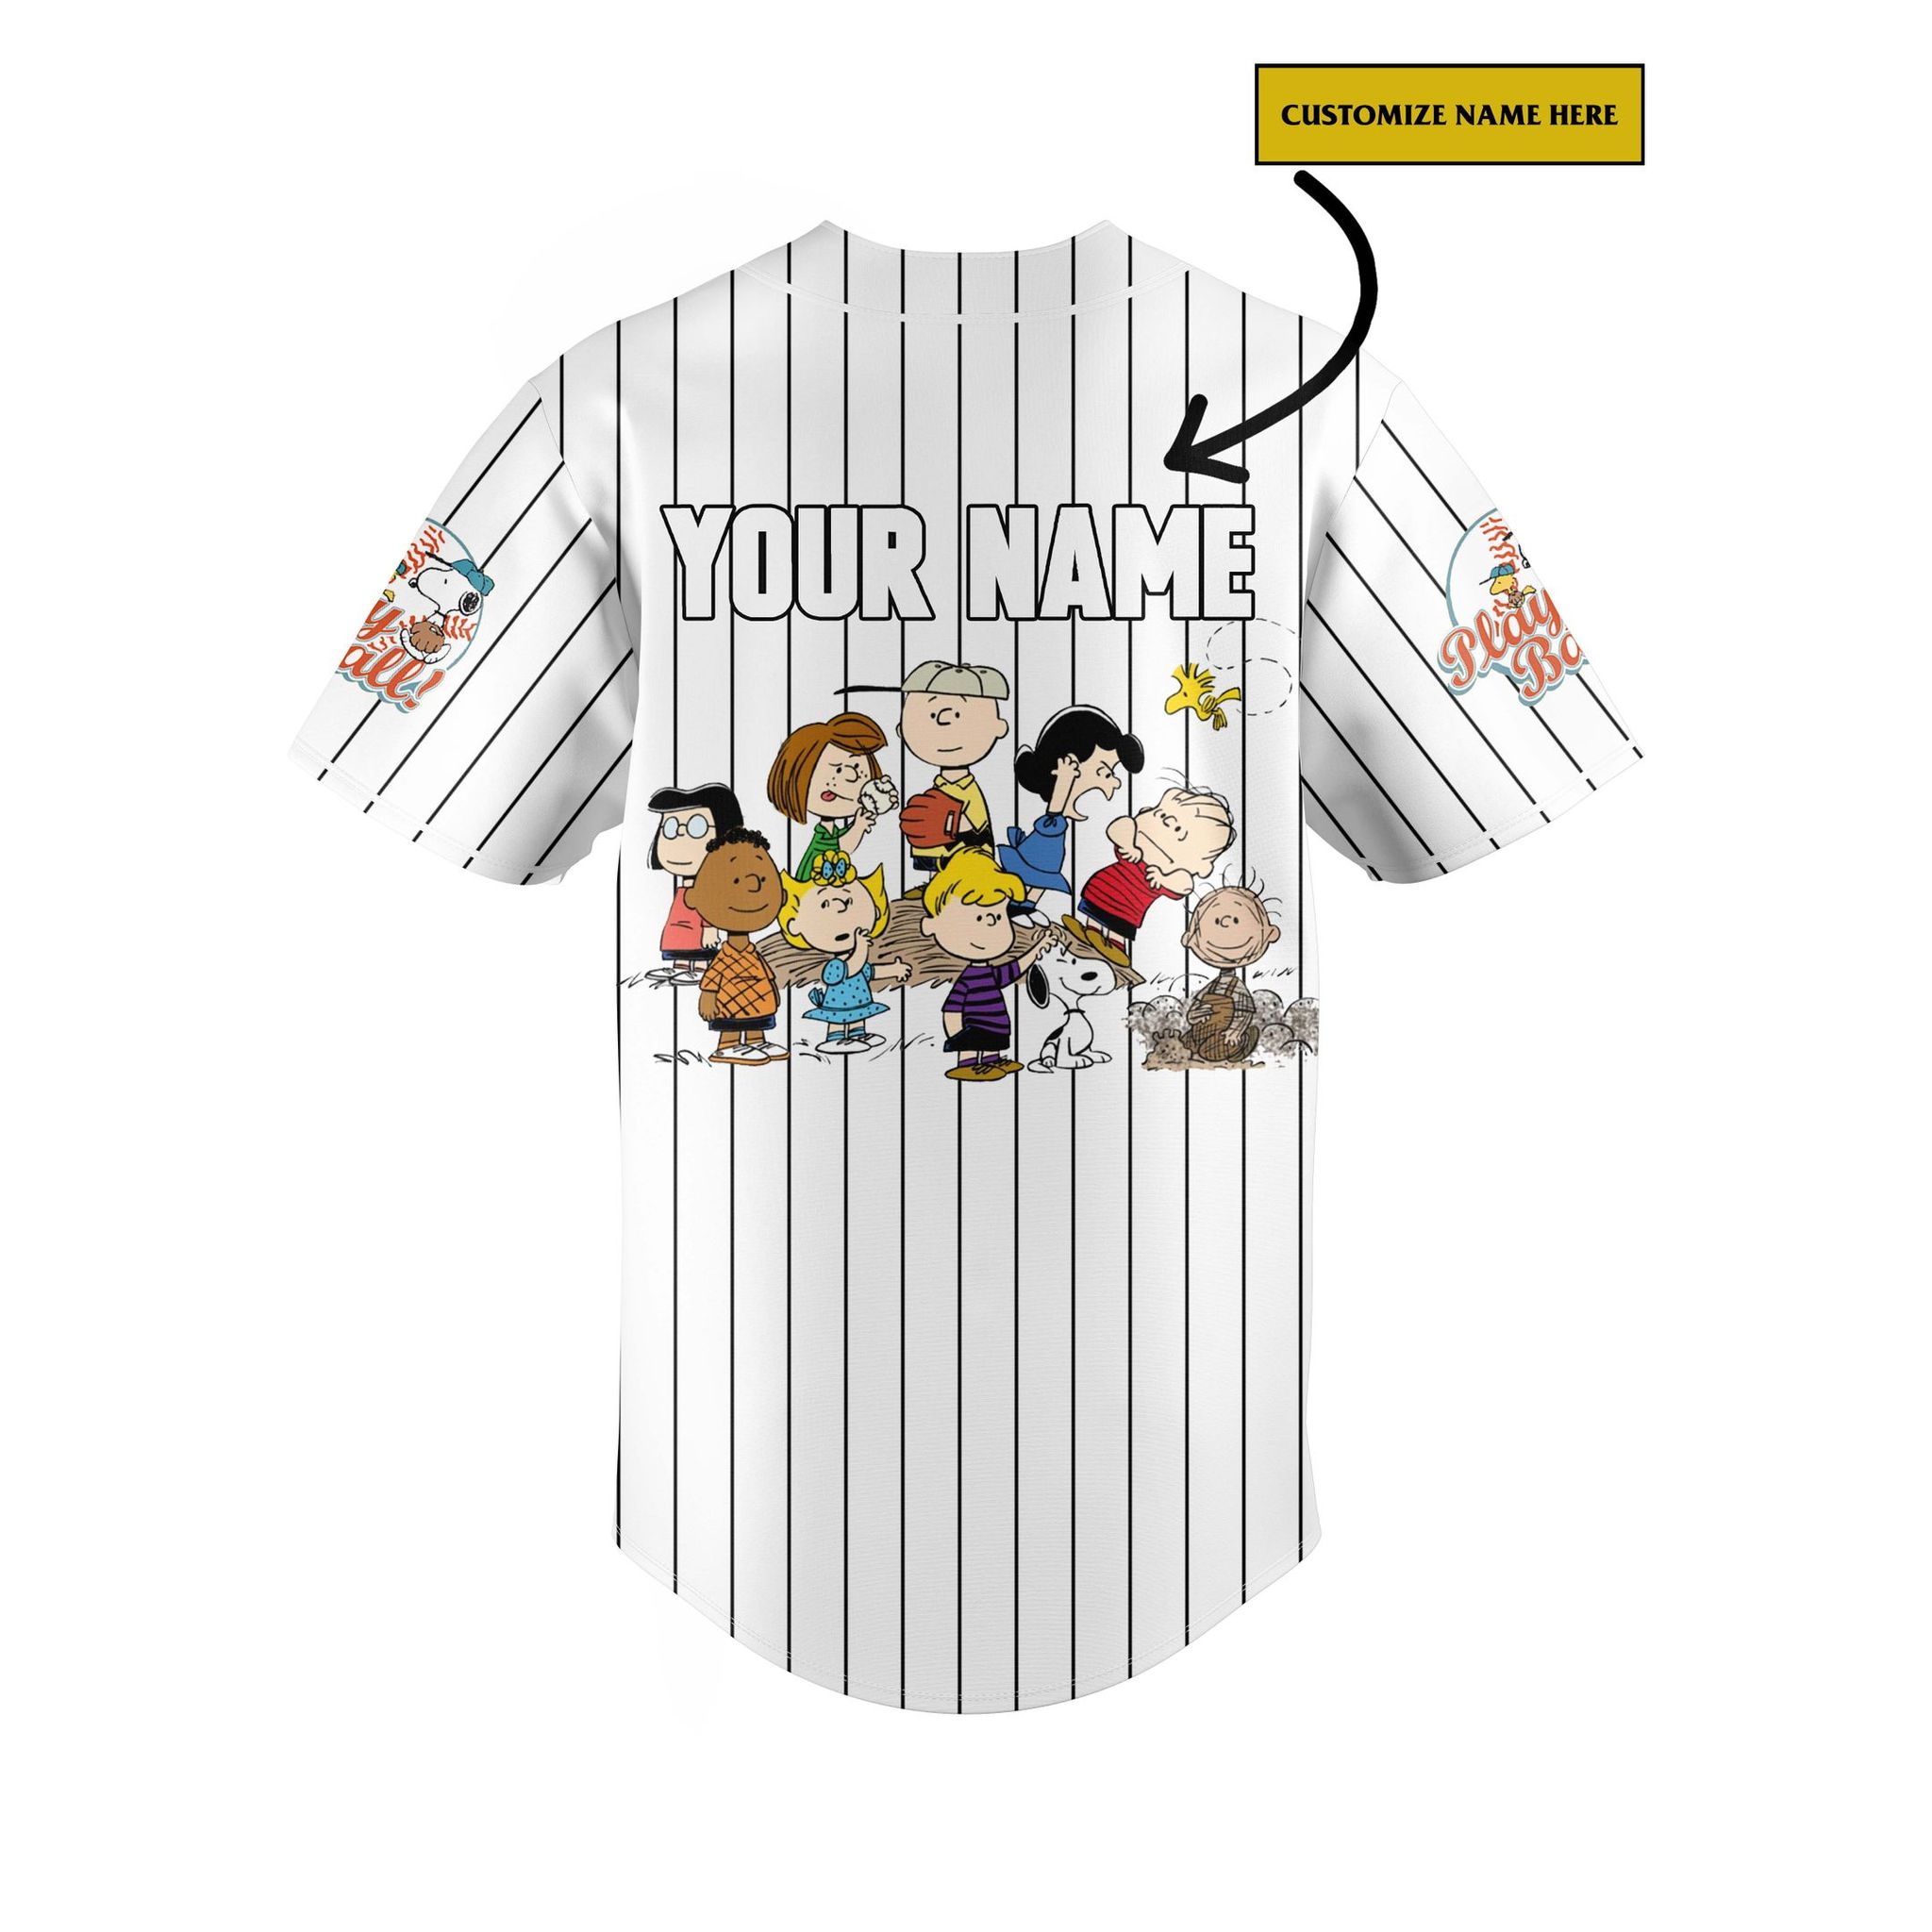 Snoopy and friends custom name baseball jersey